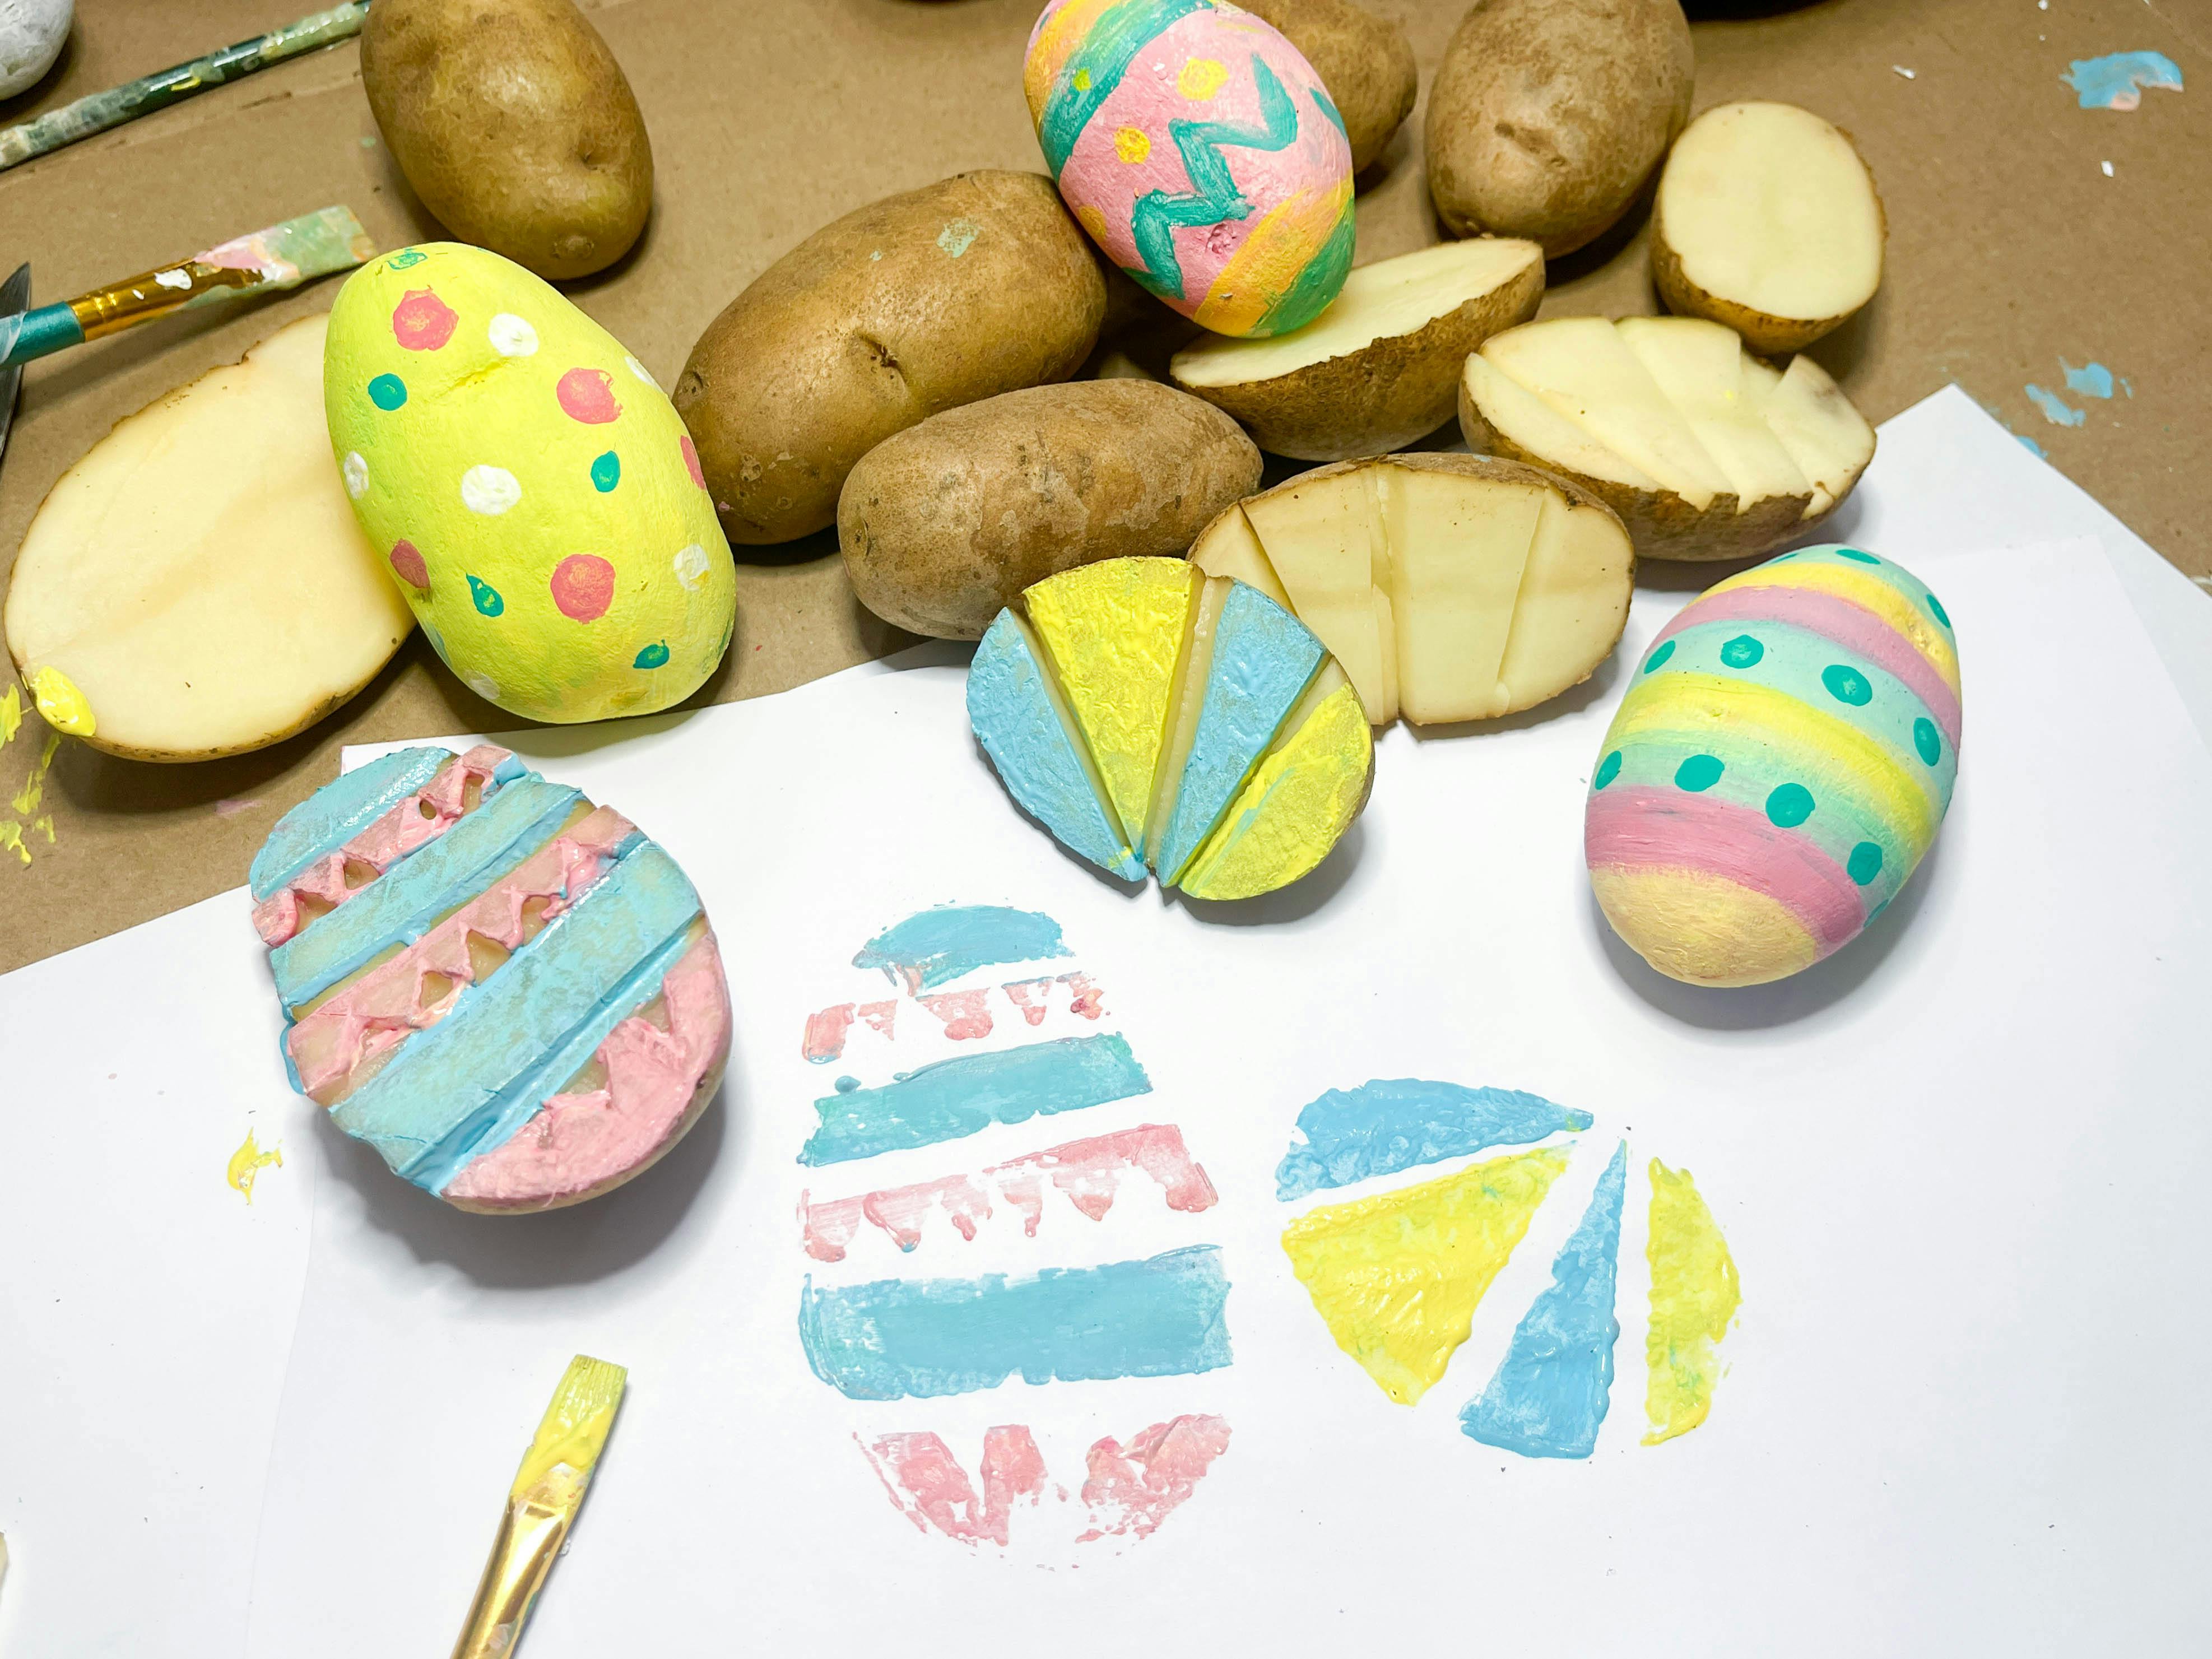 Curious About Painting Potatoes for Easter? Yes, It's Possible — And Cheap!